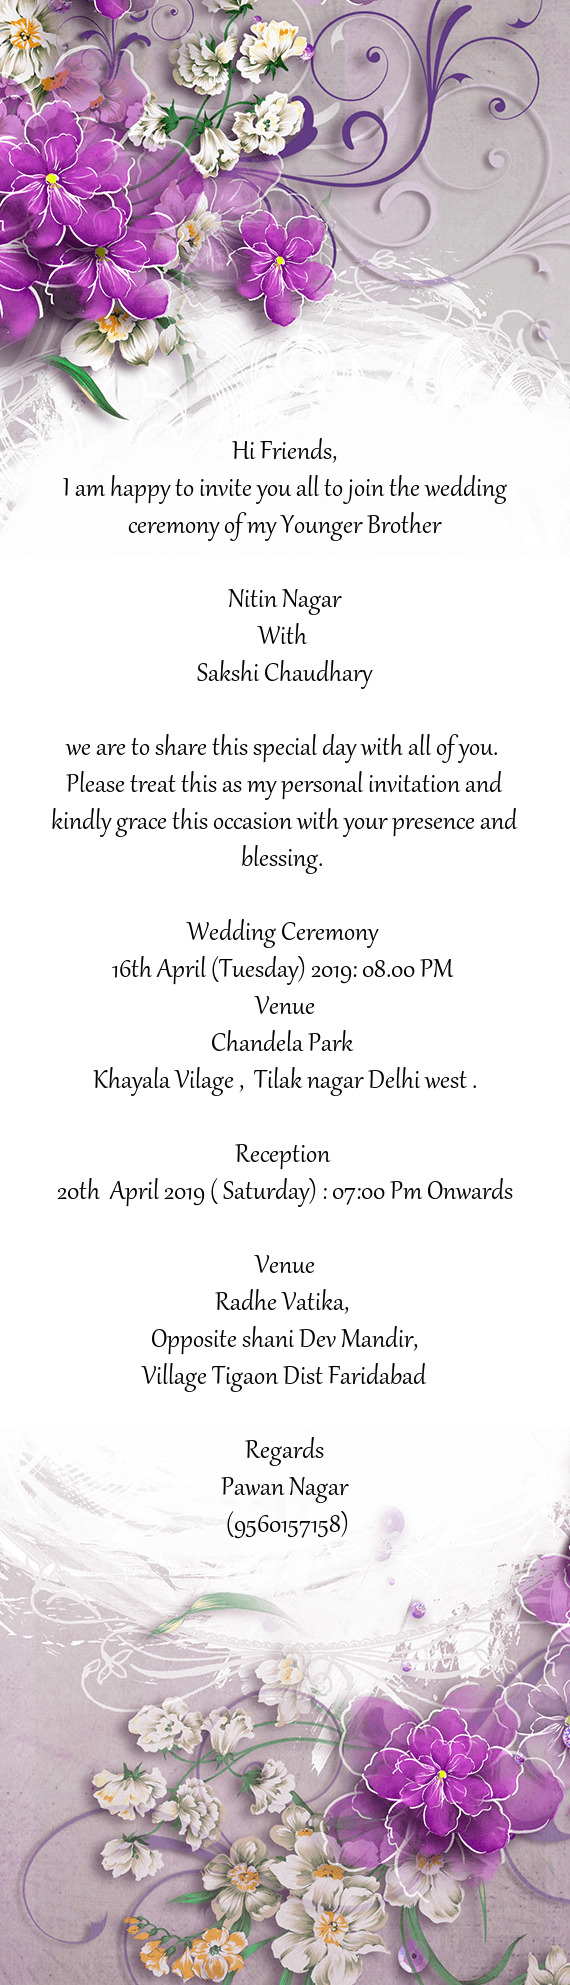 I am happy to invite you all to join the wedding ceremony of my Younger Brother